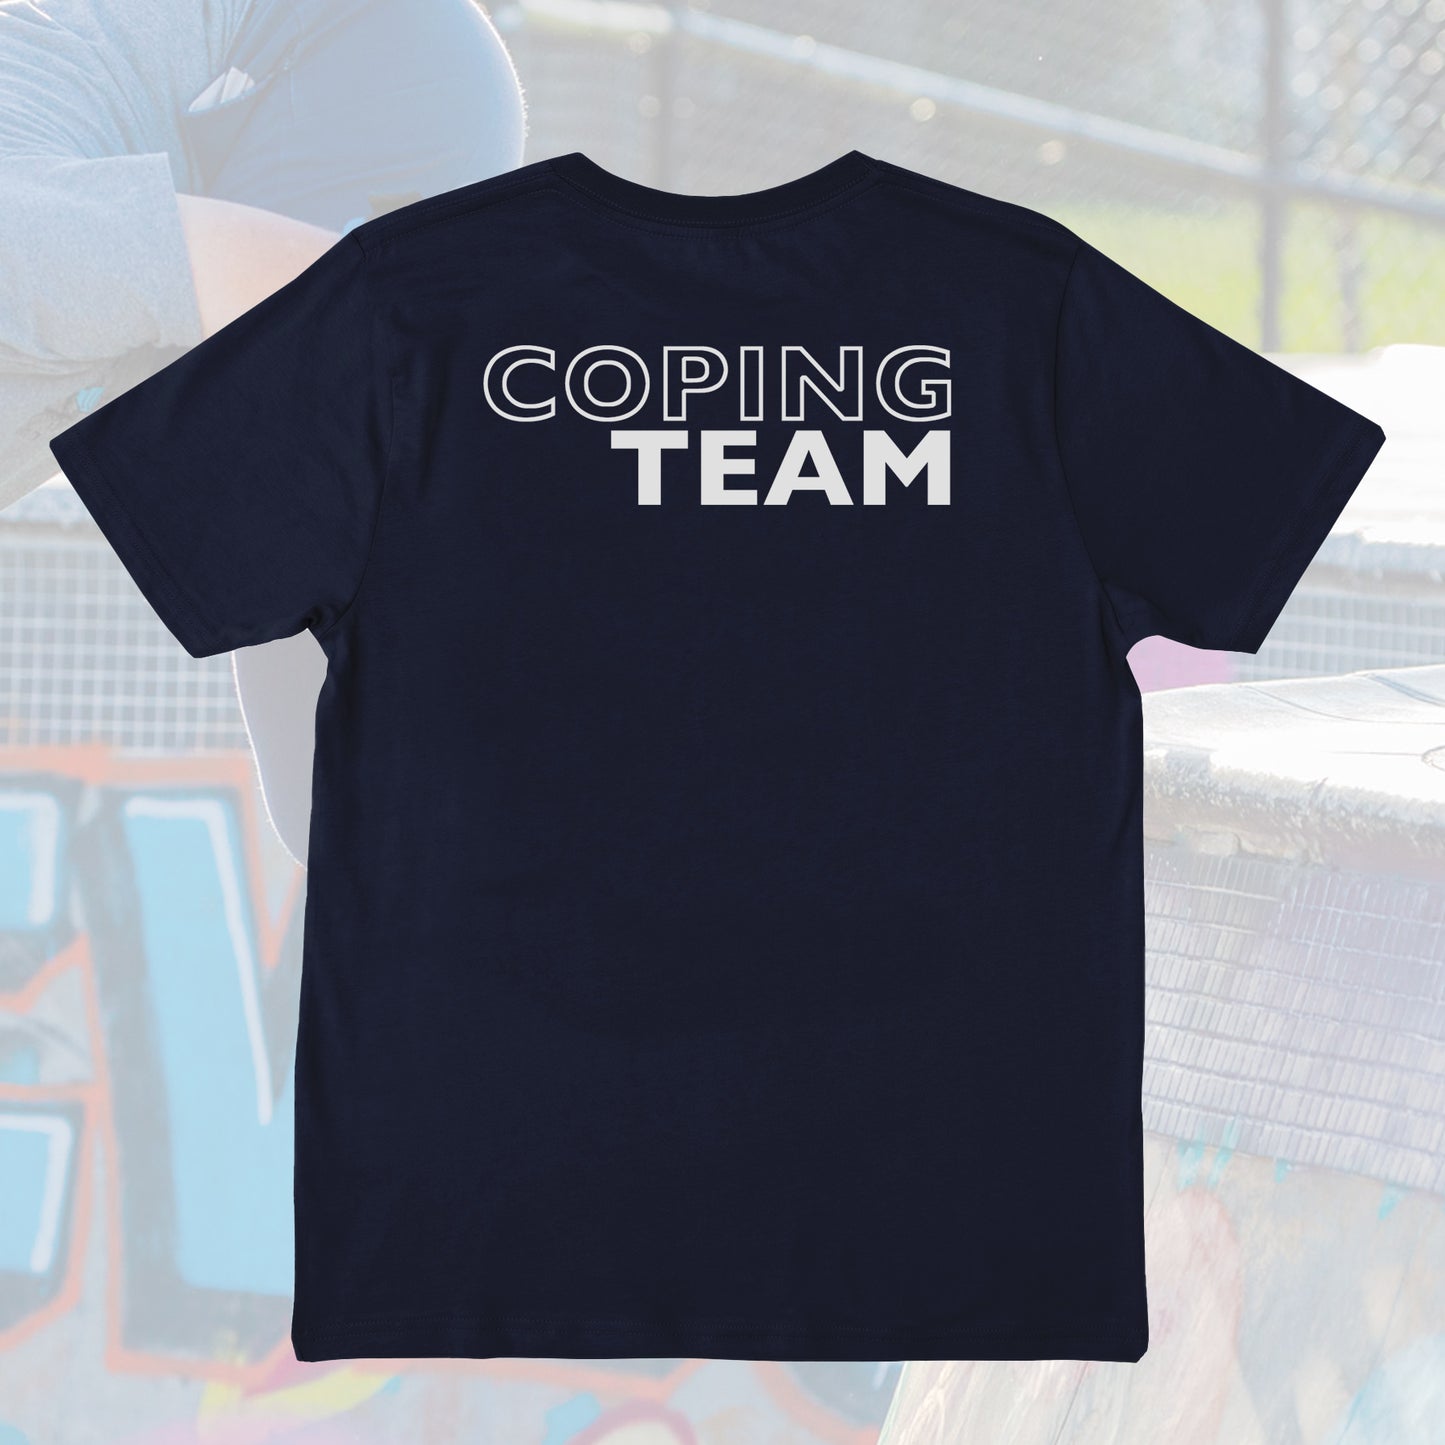 Coping Team: Navy Blue with White T-Shirt